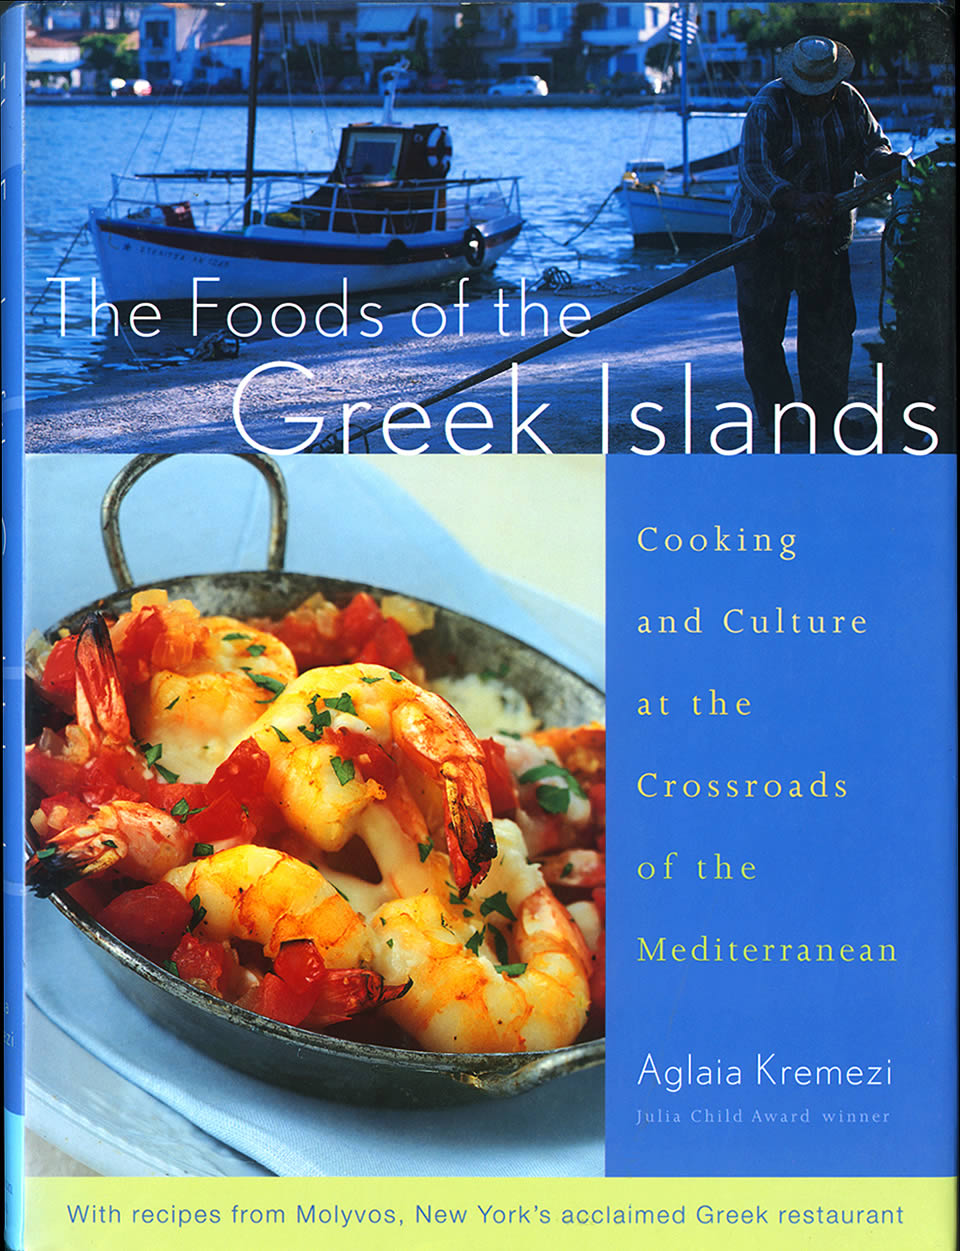 THE FOODS OF THE GREEK ISLANDS